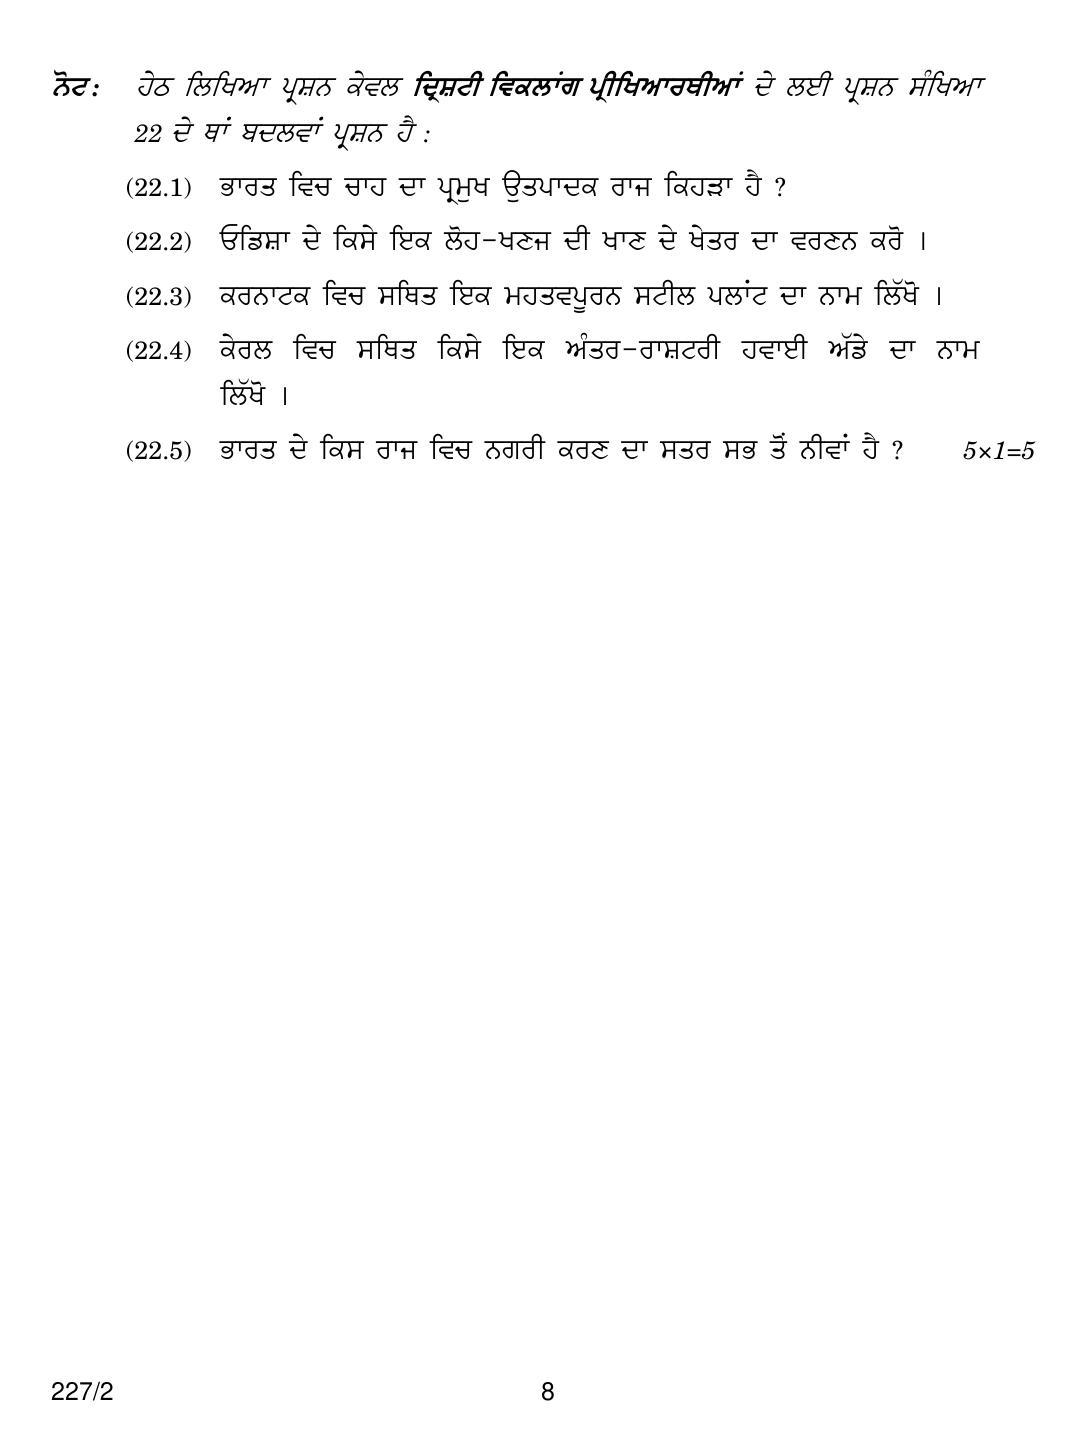 CBSE Class 12 227-2  GEOGRAPHY PUNJABI VERSION 2018 Question Paper - Page 8